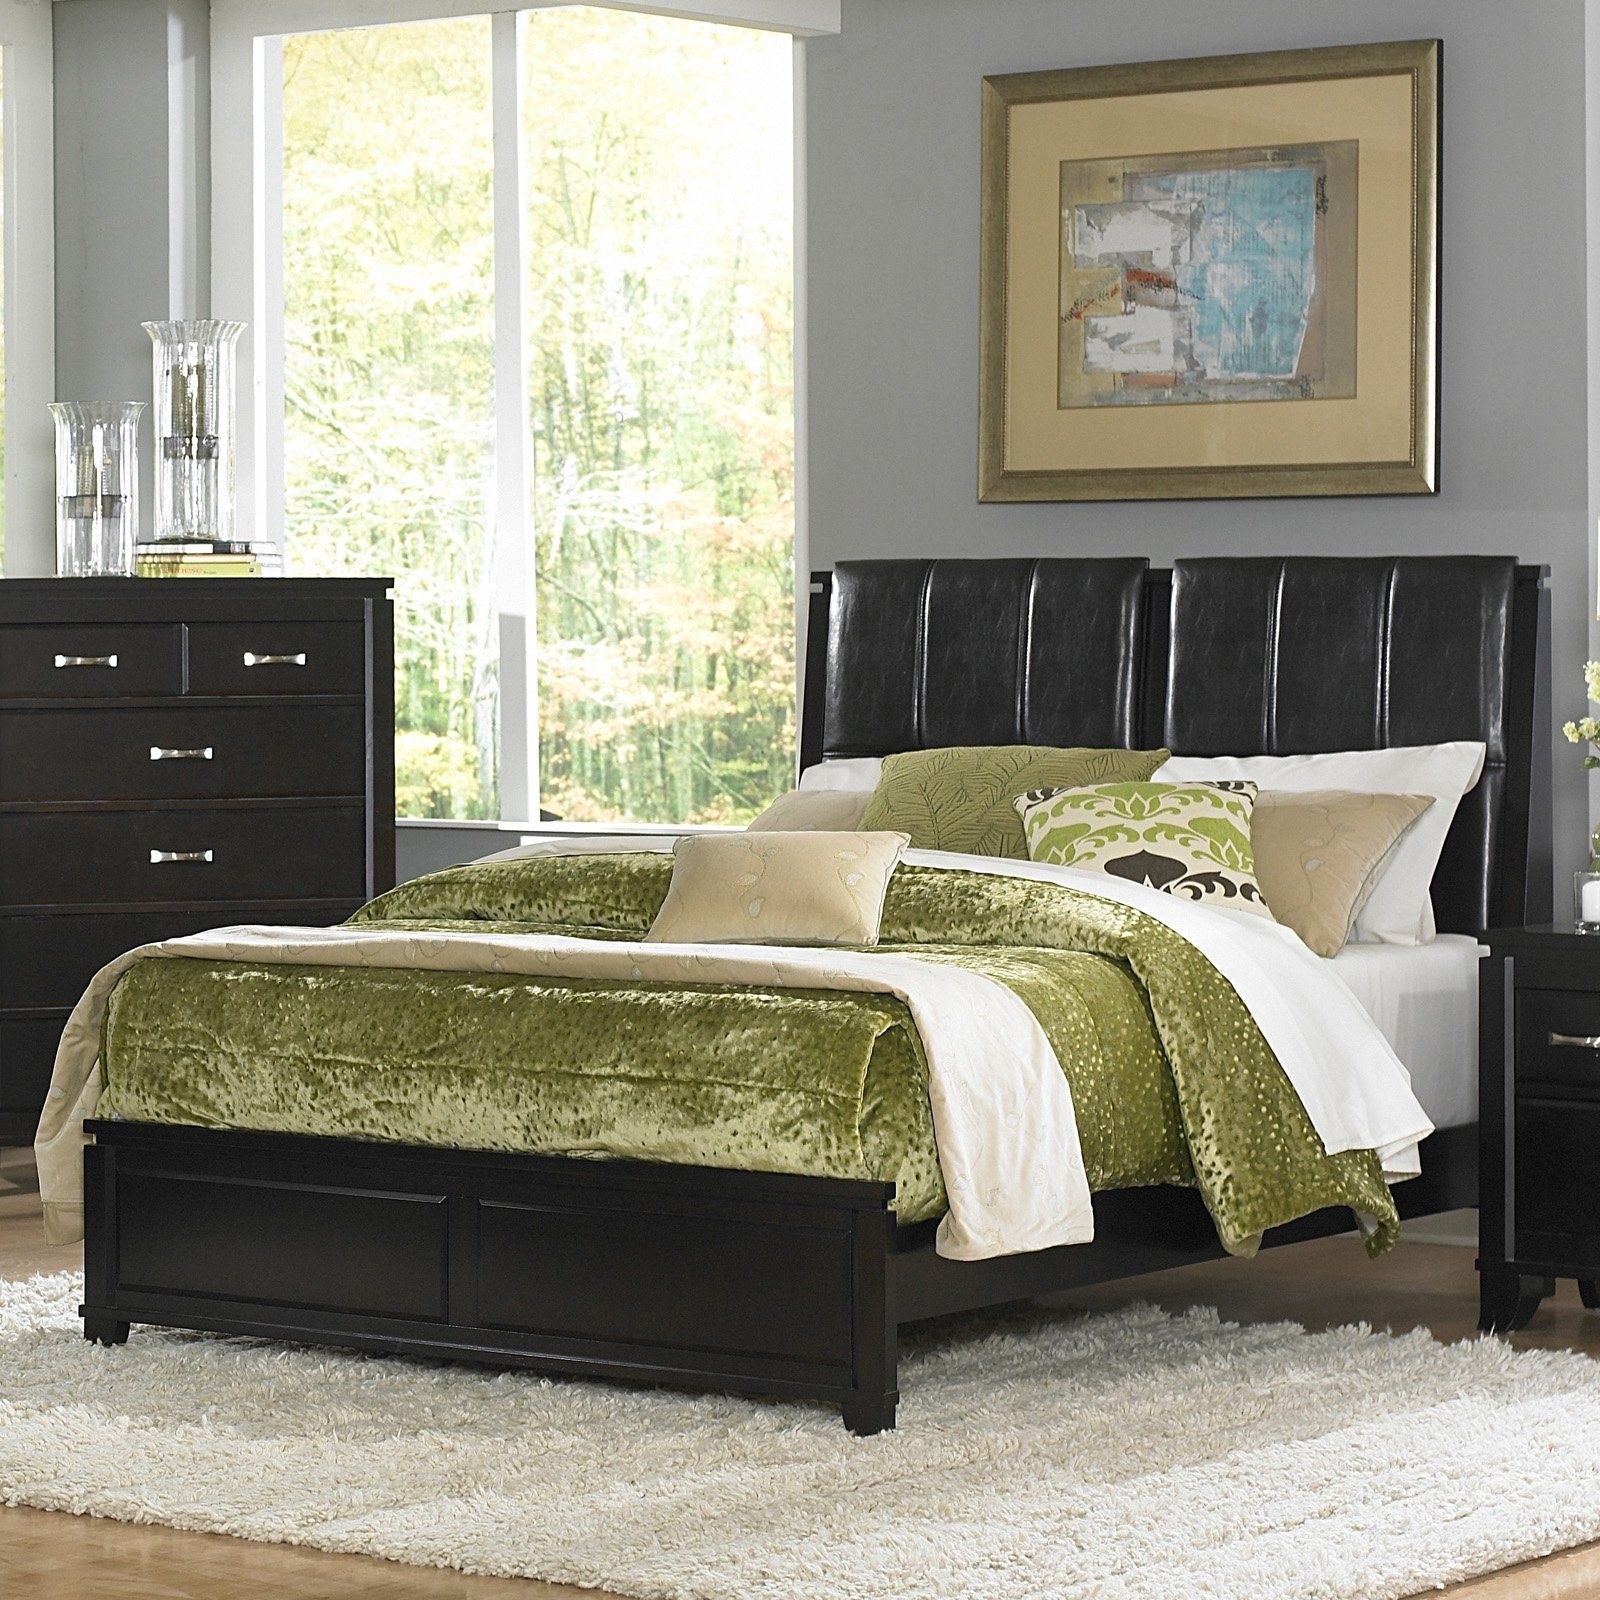 Low profile twin bed 25